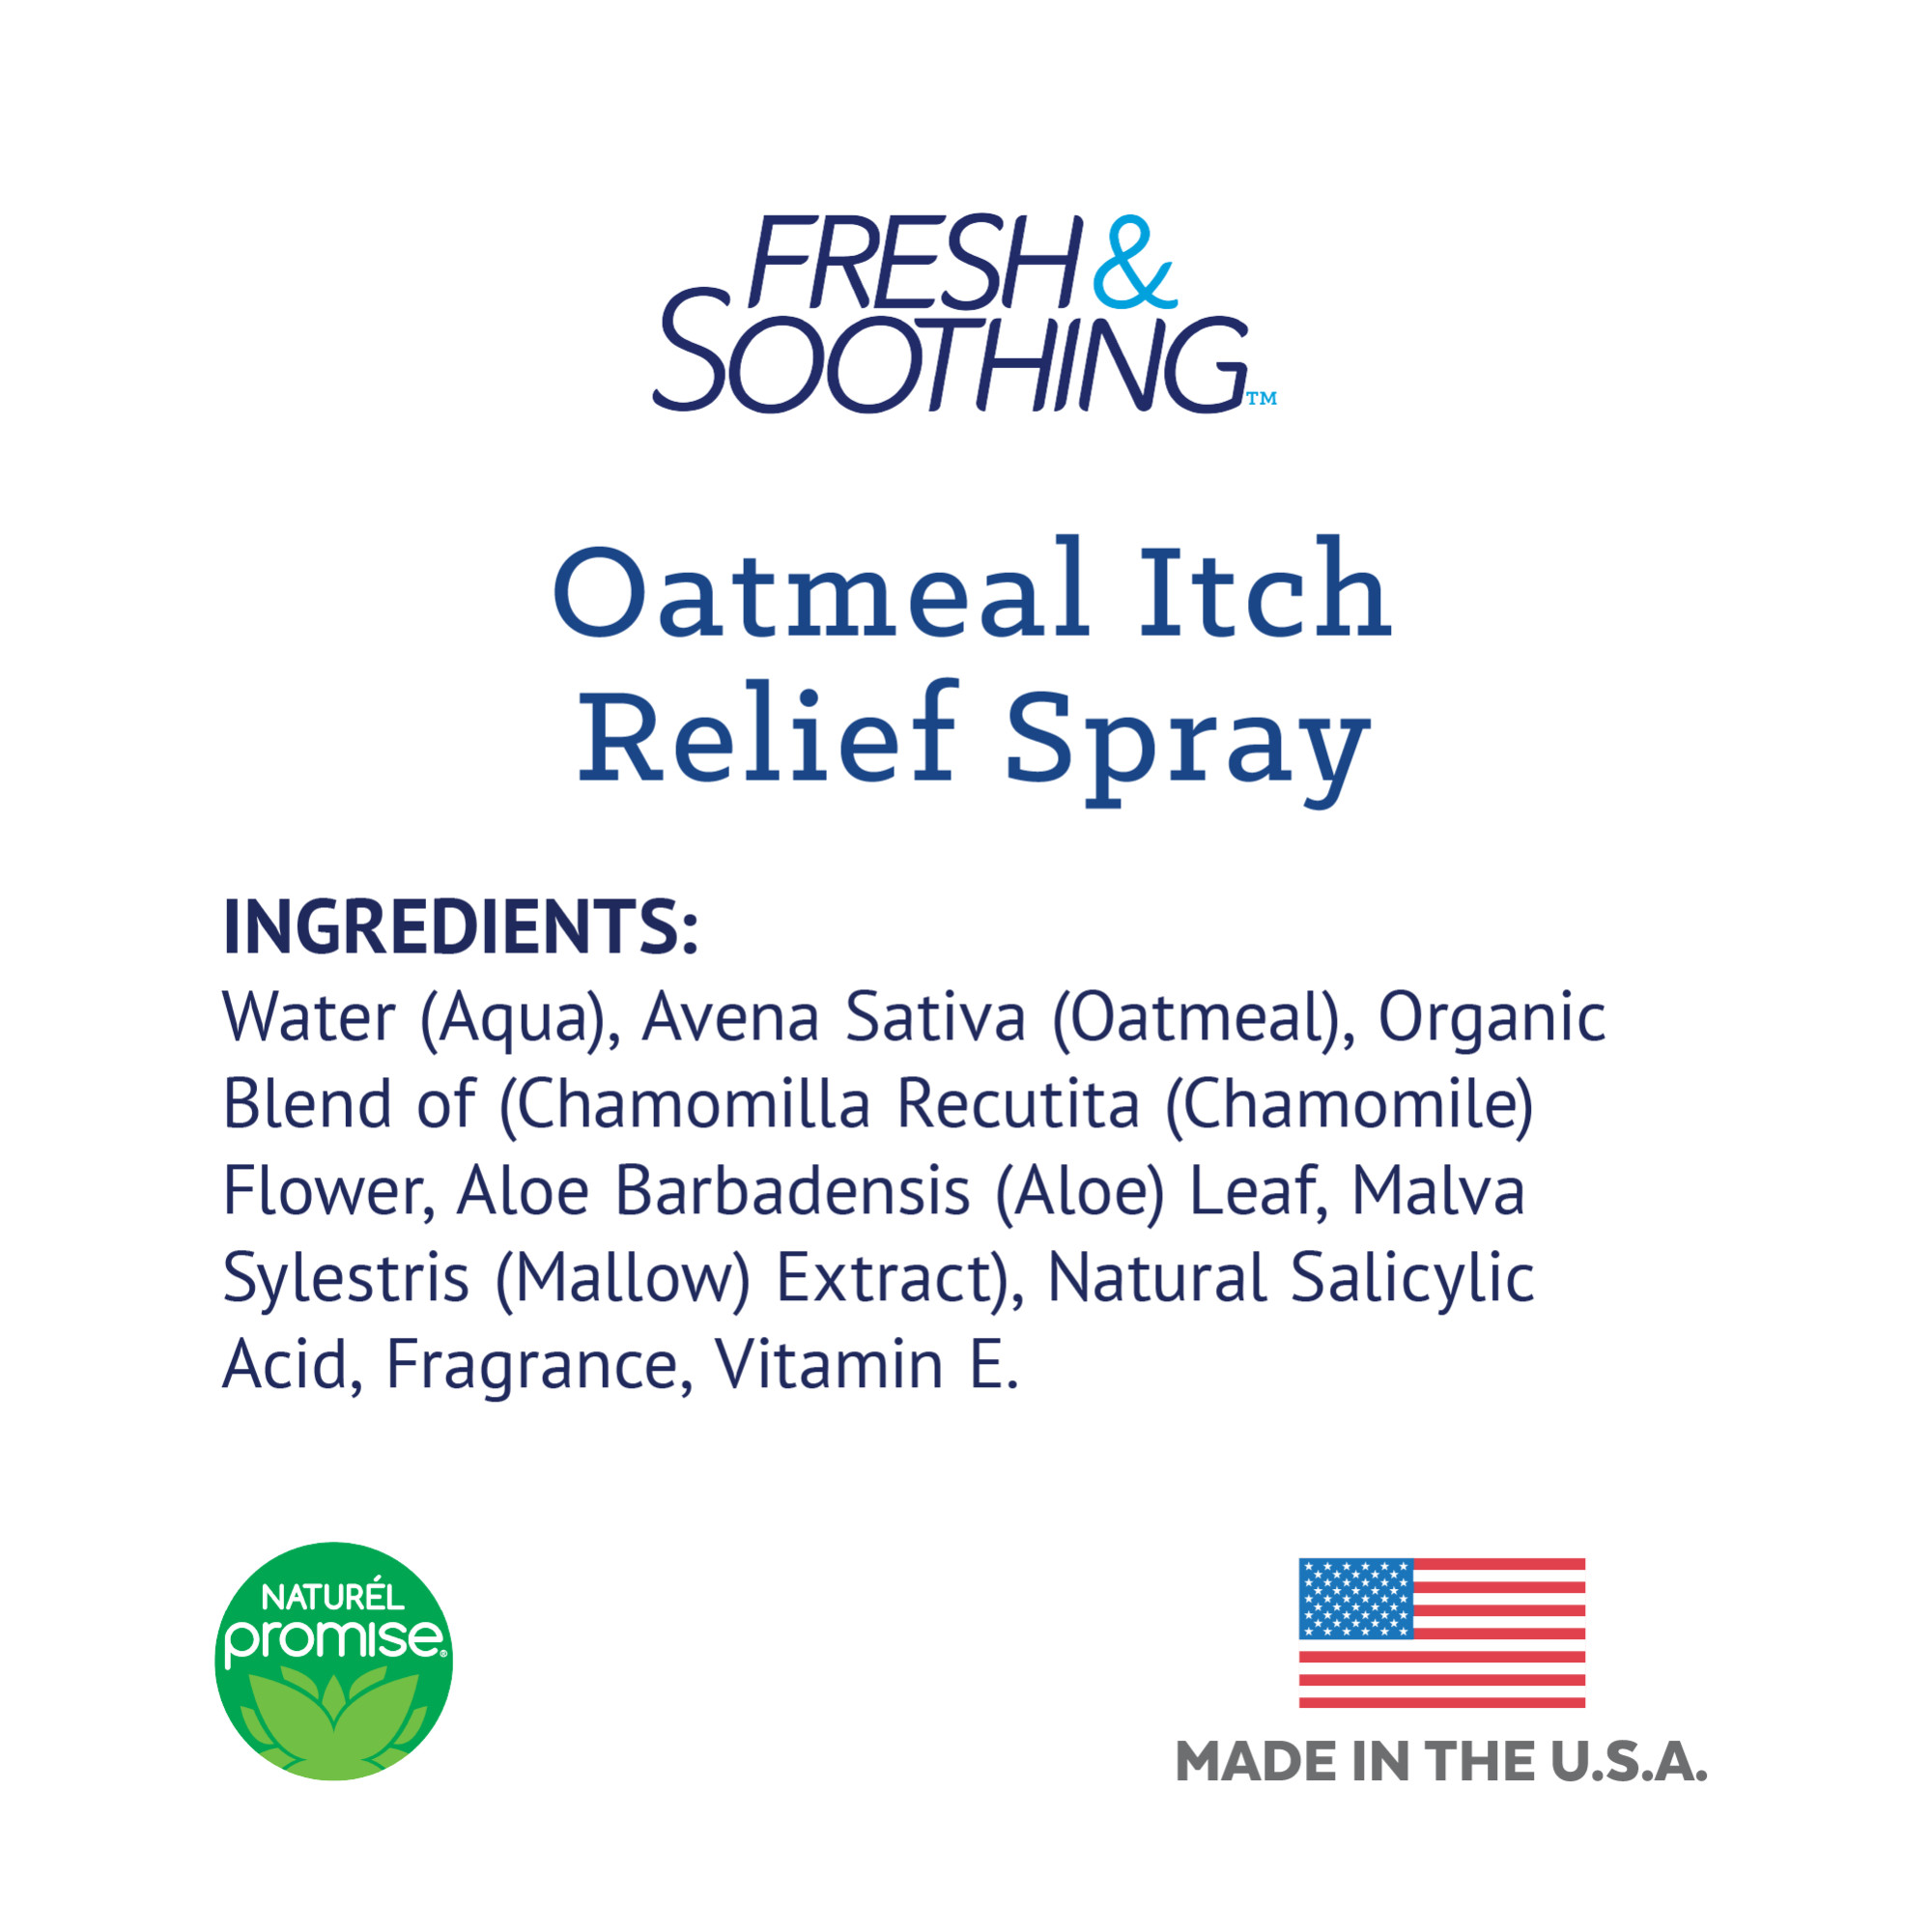 Oatmeal Itch Relief Medicated Spray for Pets